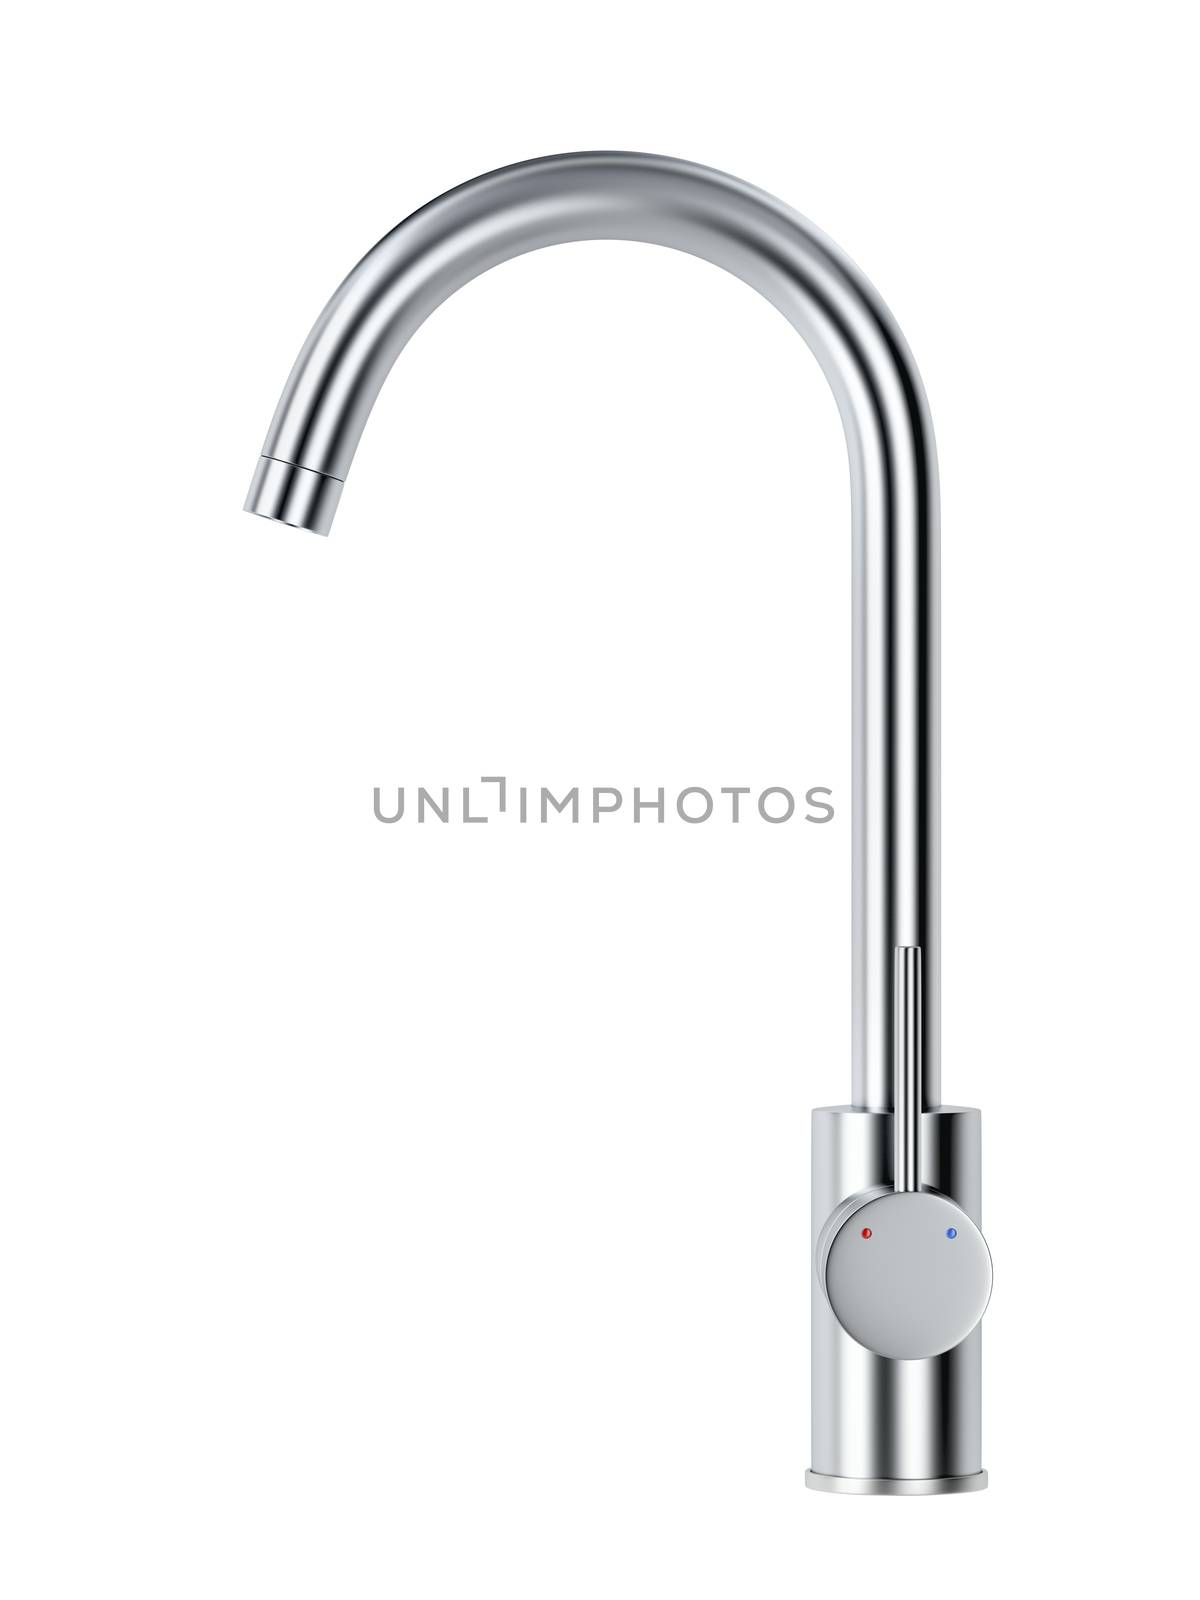 Silver kitchen faucet isolated on white background, side view